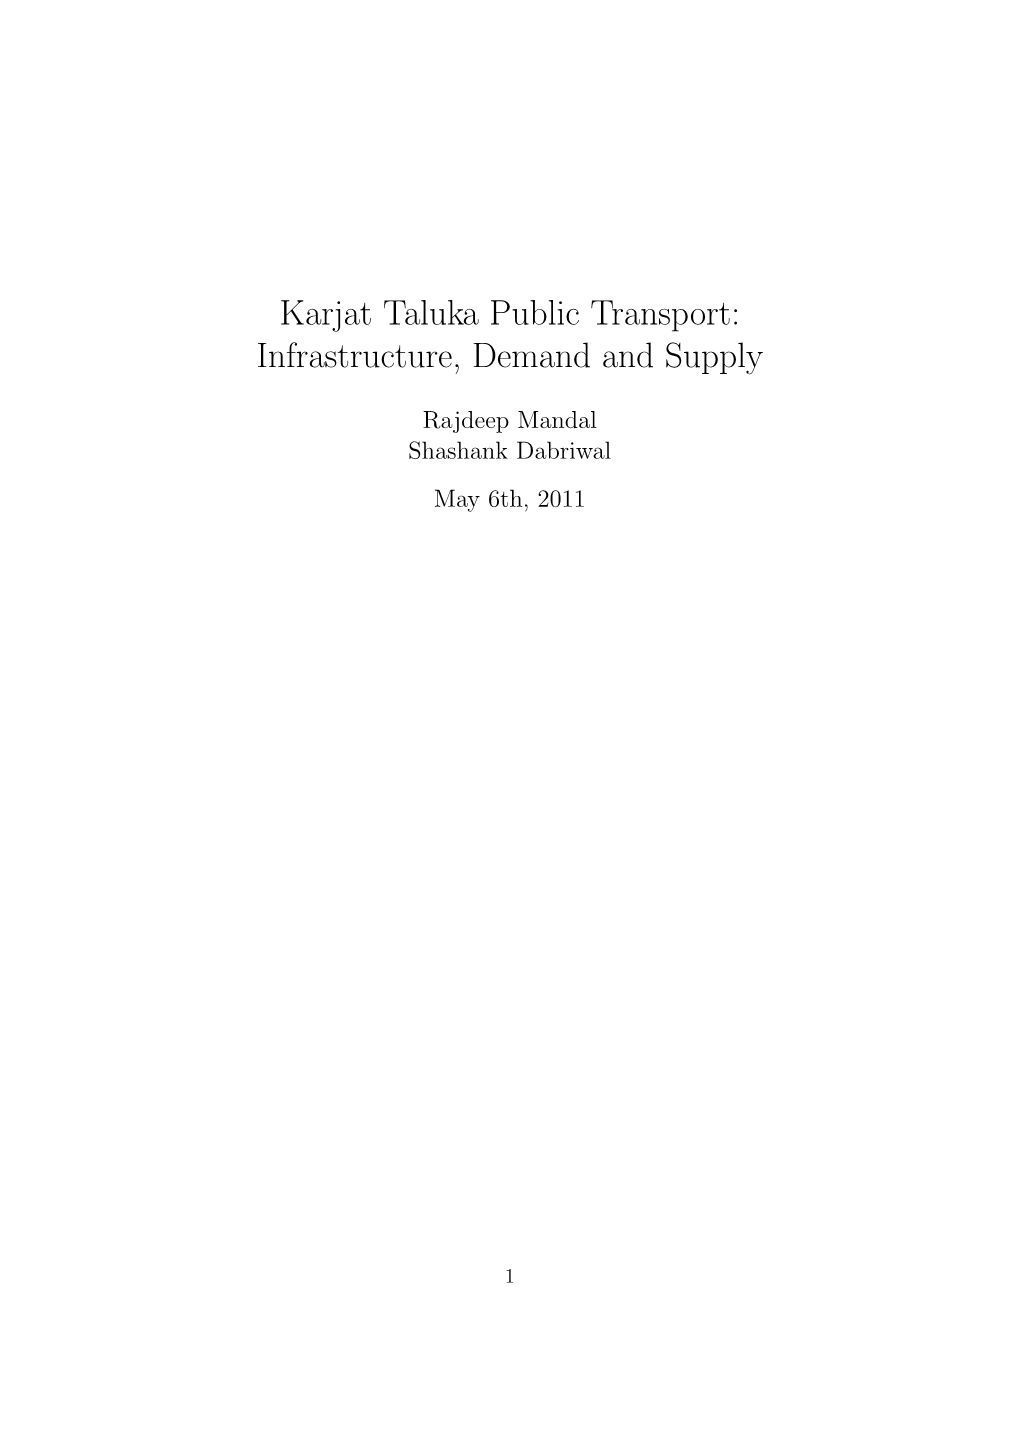 Karjat Taluka Public Transport: Infrastructure, Demand and Supply